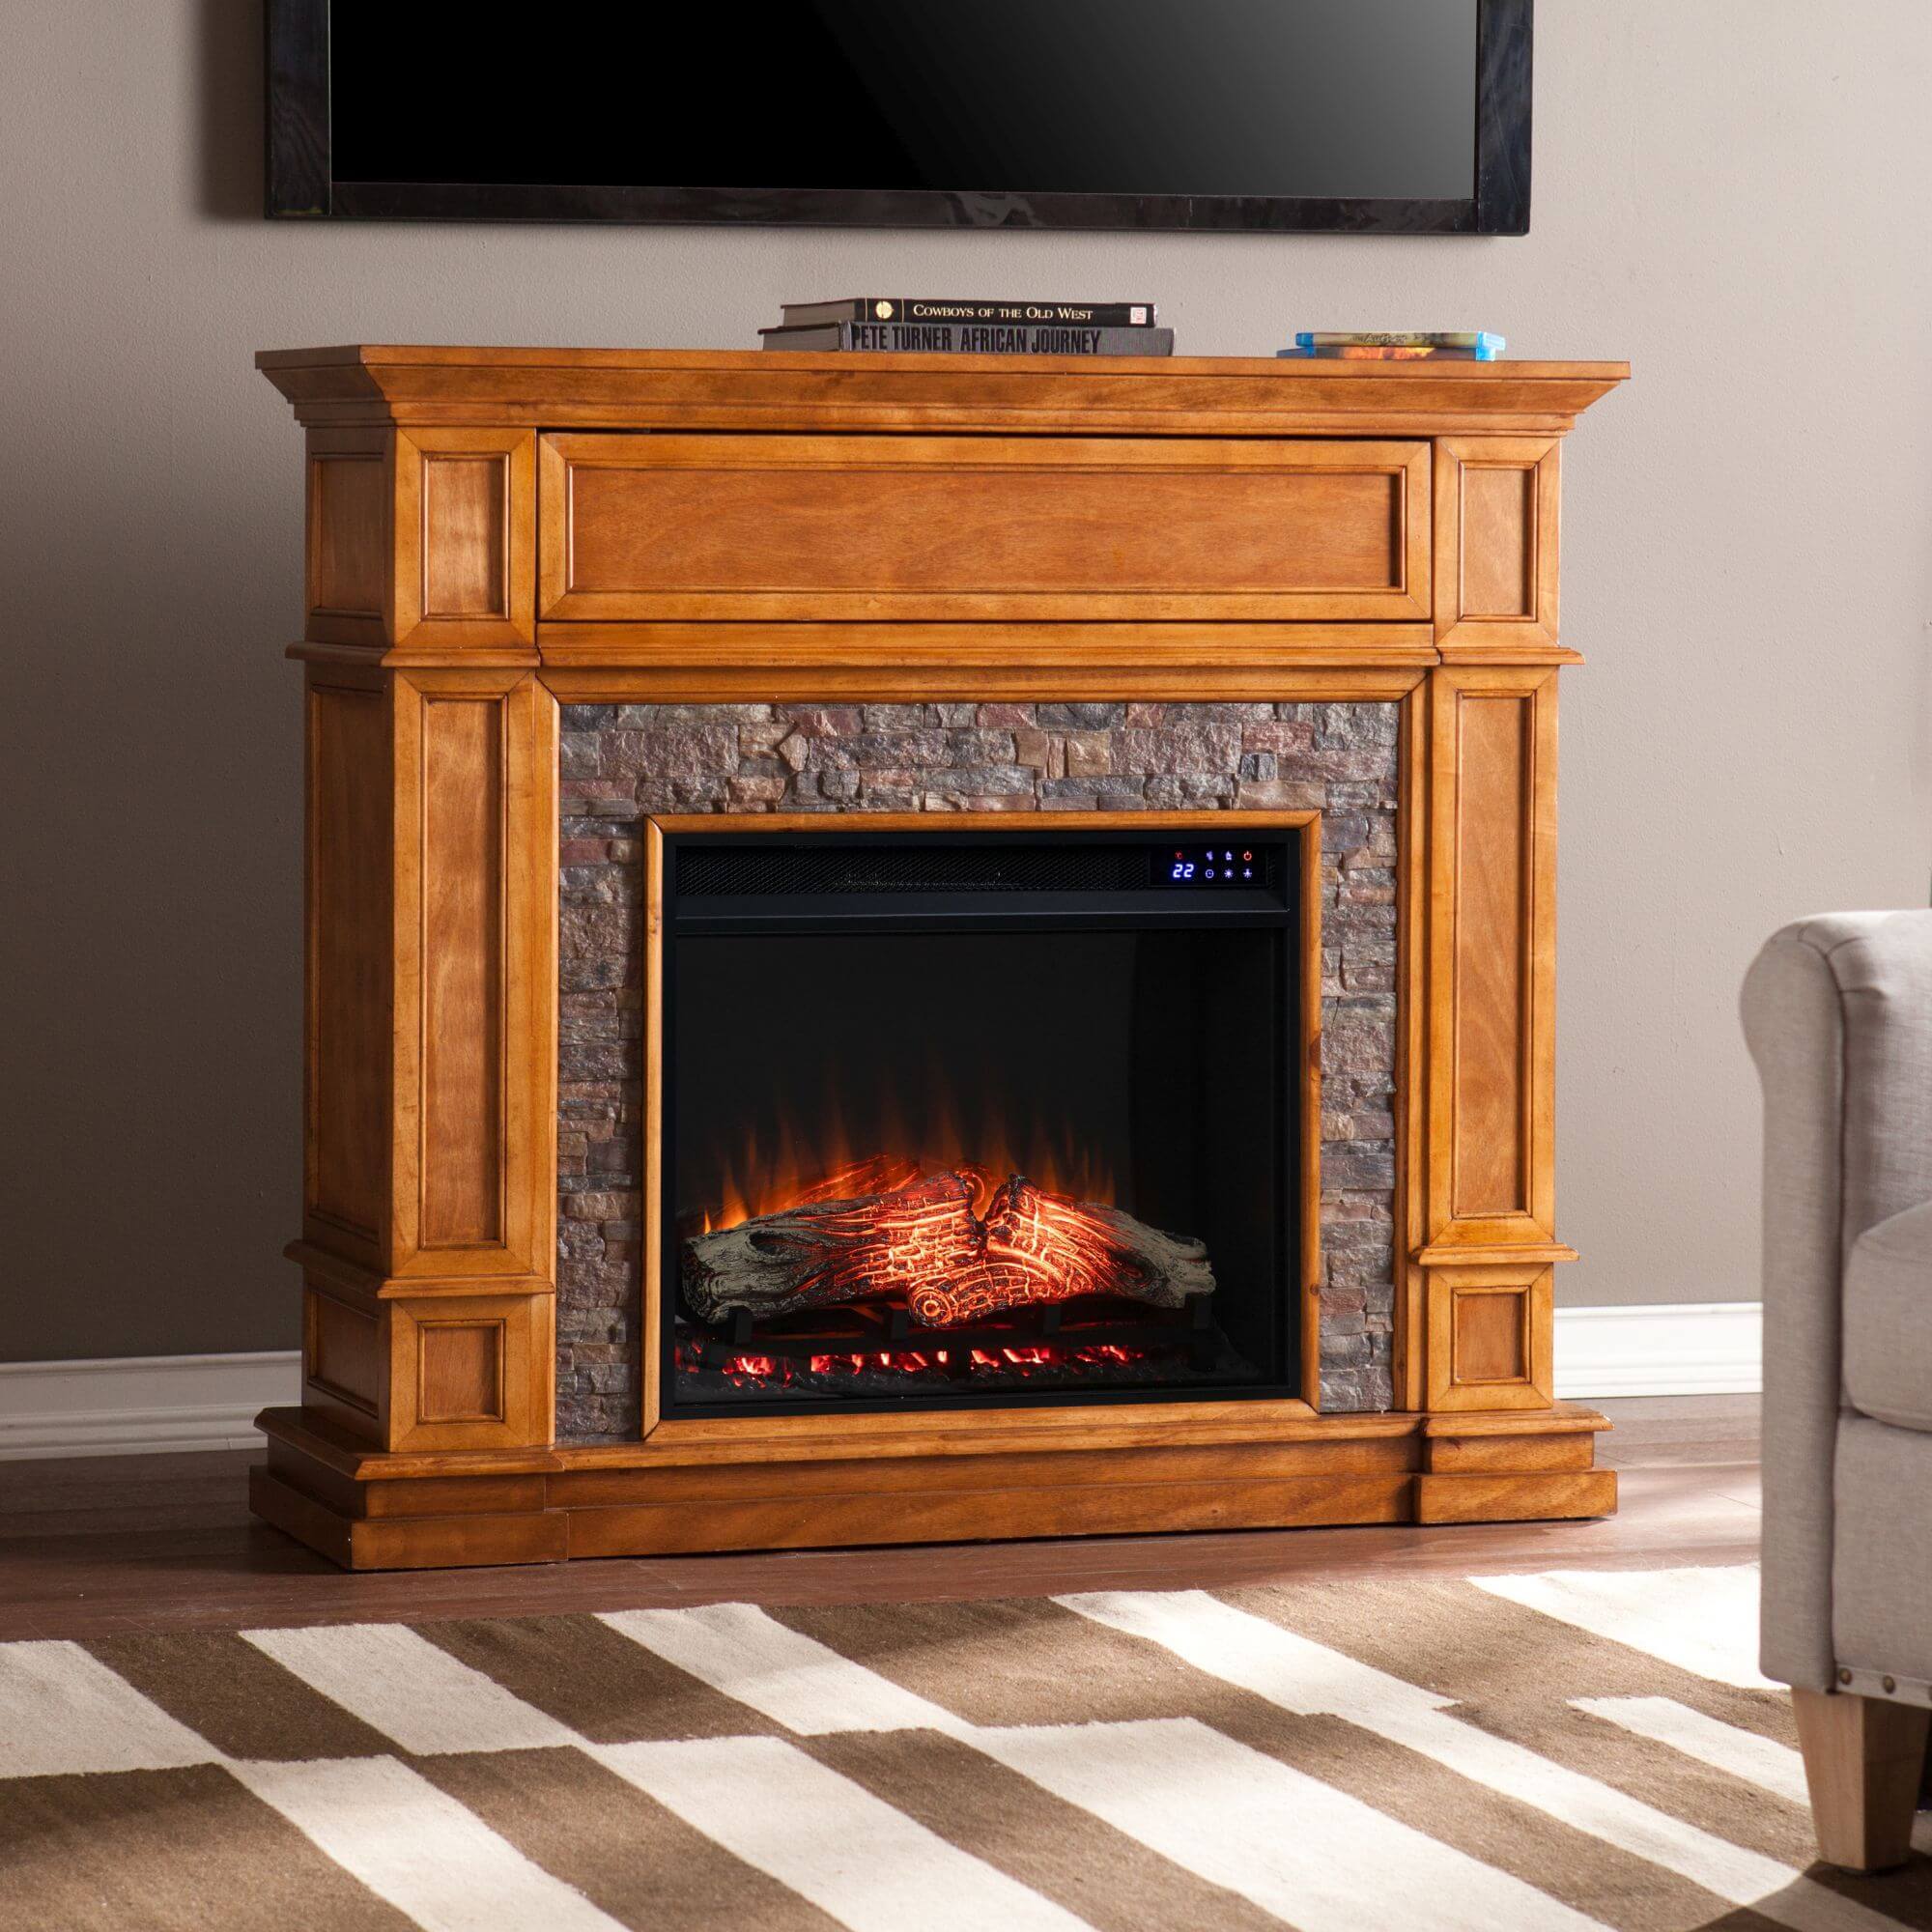 Belleview Touch Screen Electric Fireplace with Faux Stone